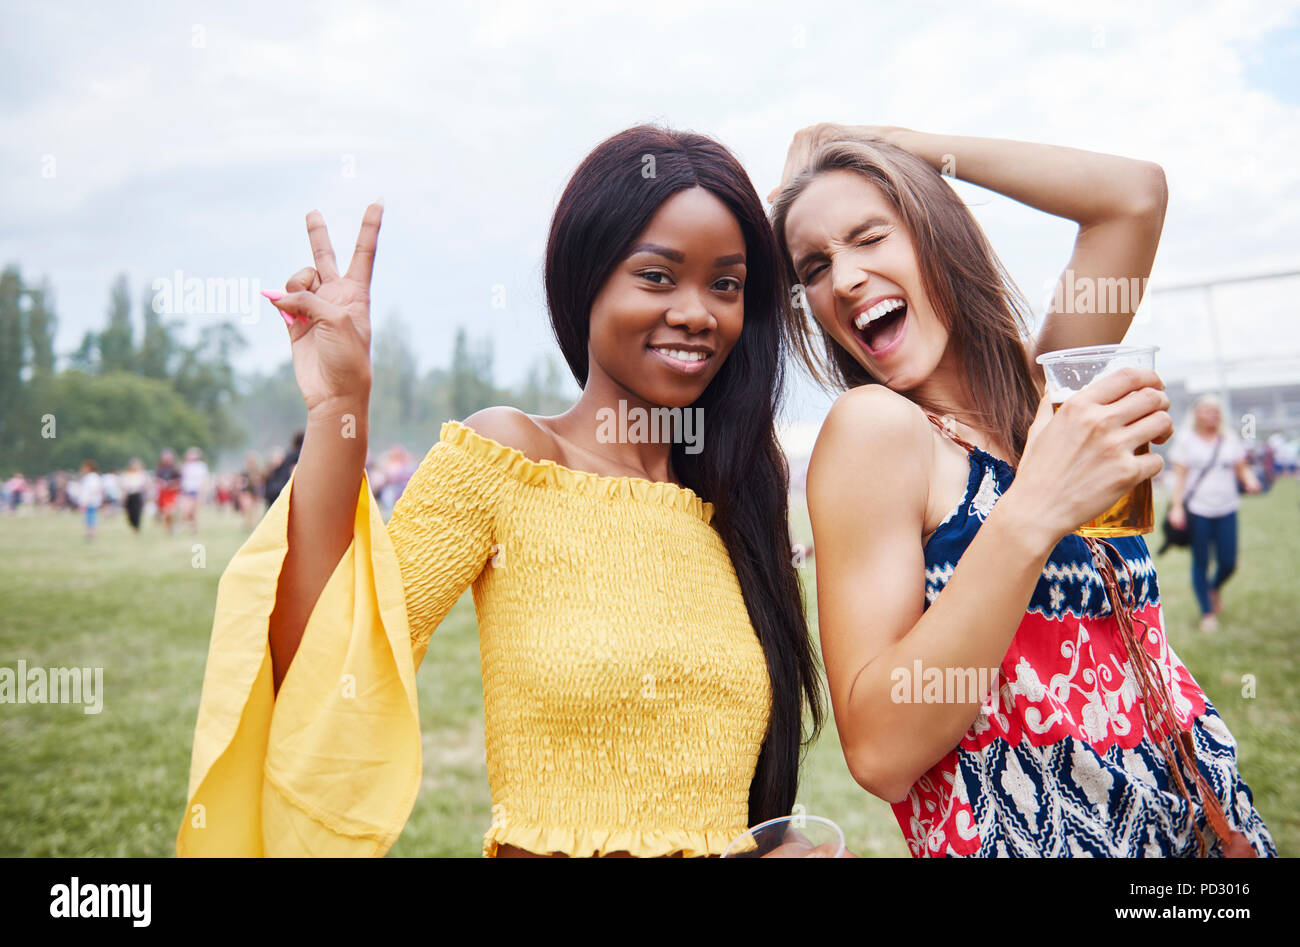 Friends drinking and dancing with arms raised in music festival Stock Photo